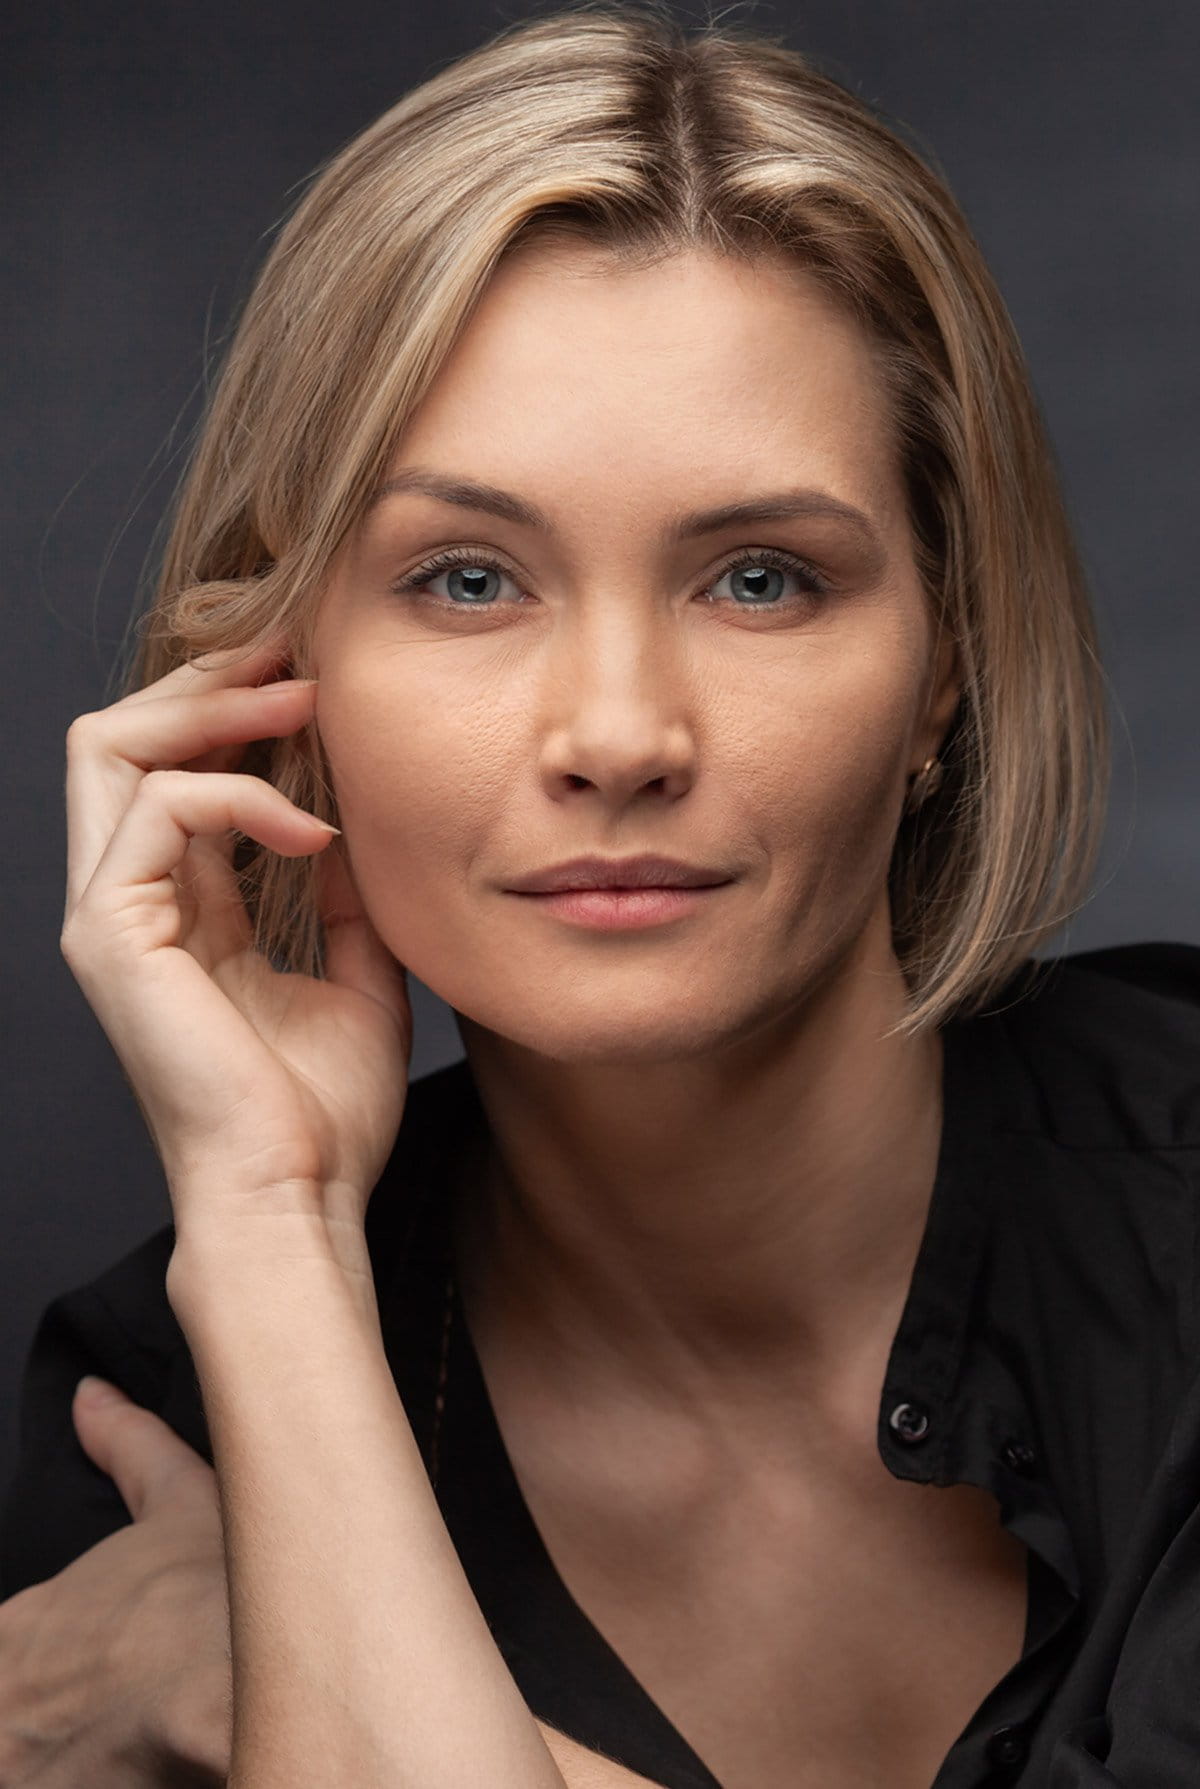 blonde neck lift patient model with her hand to the side of her face